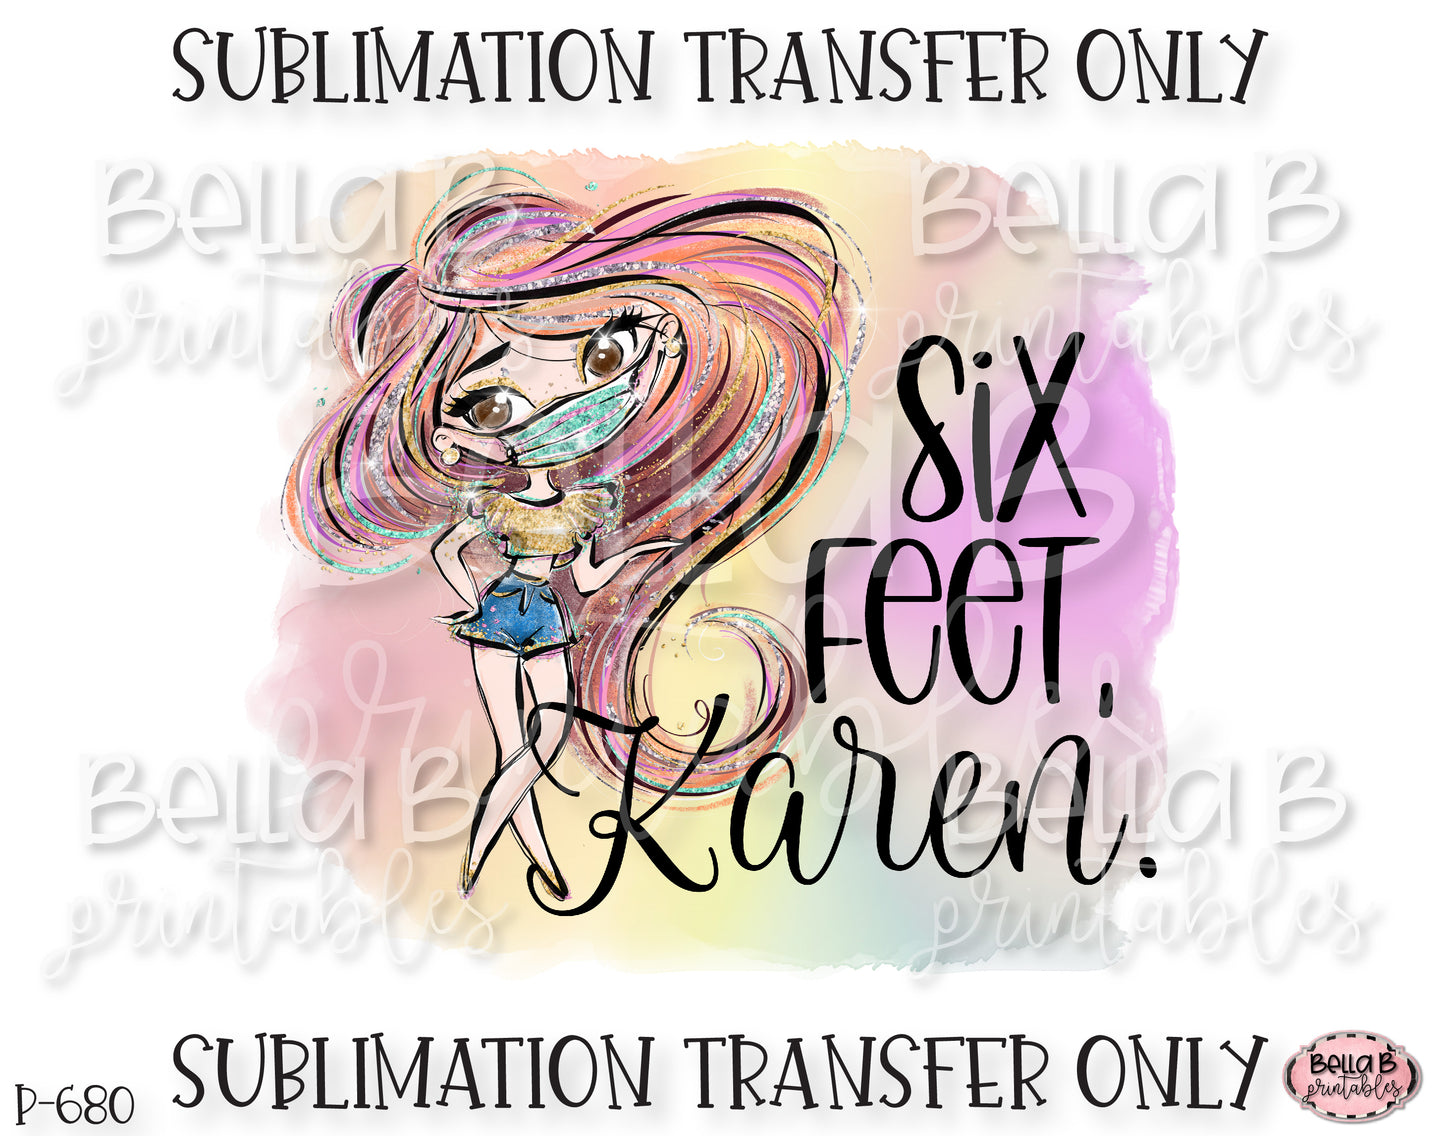 Funny Social Distancing Sublimation Transfer, 6 Feet Karen, Ready To Press, Heat Press Transfer, Sublimation Print